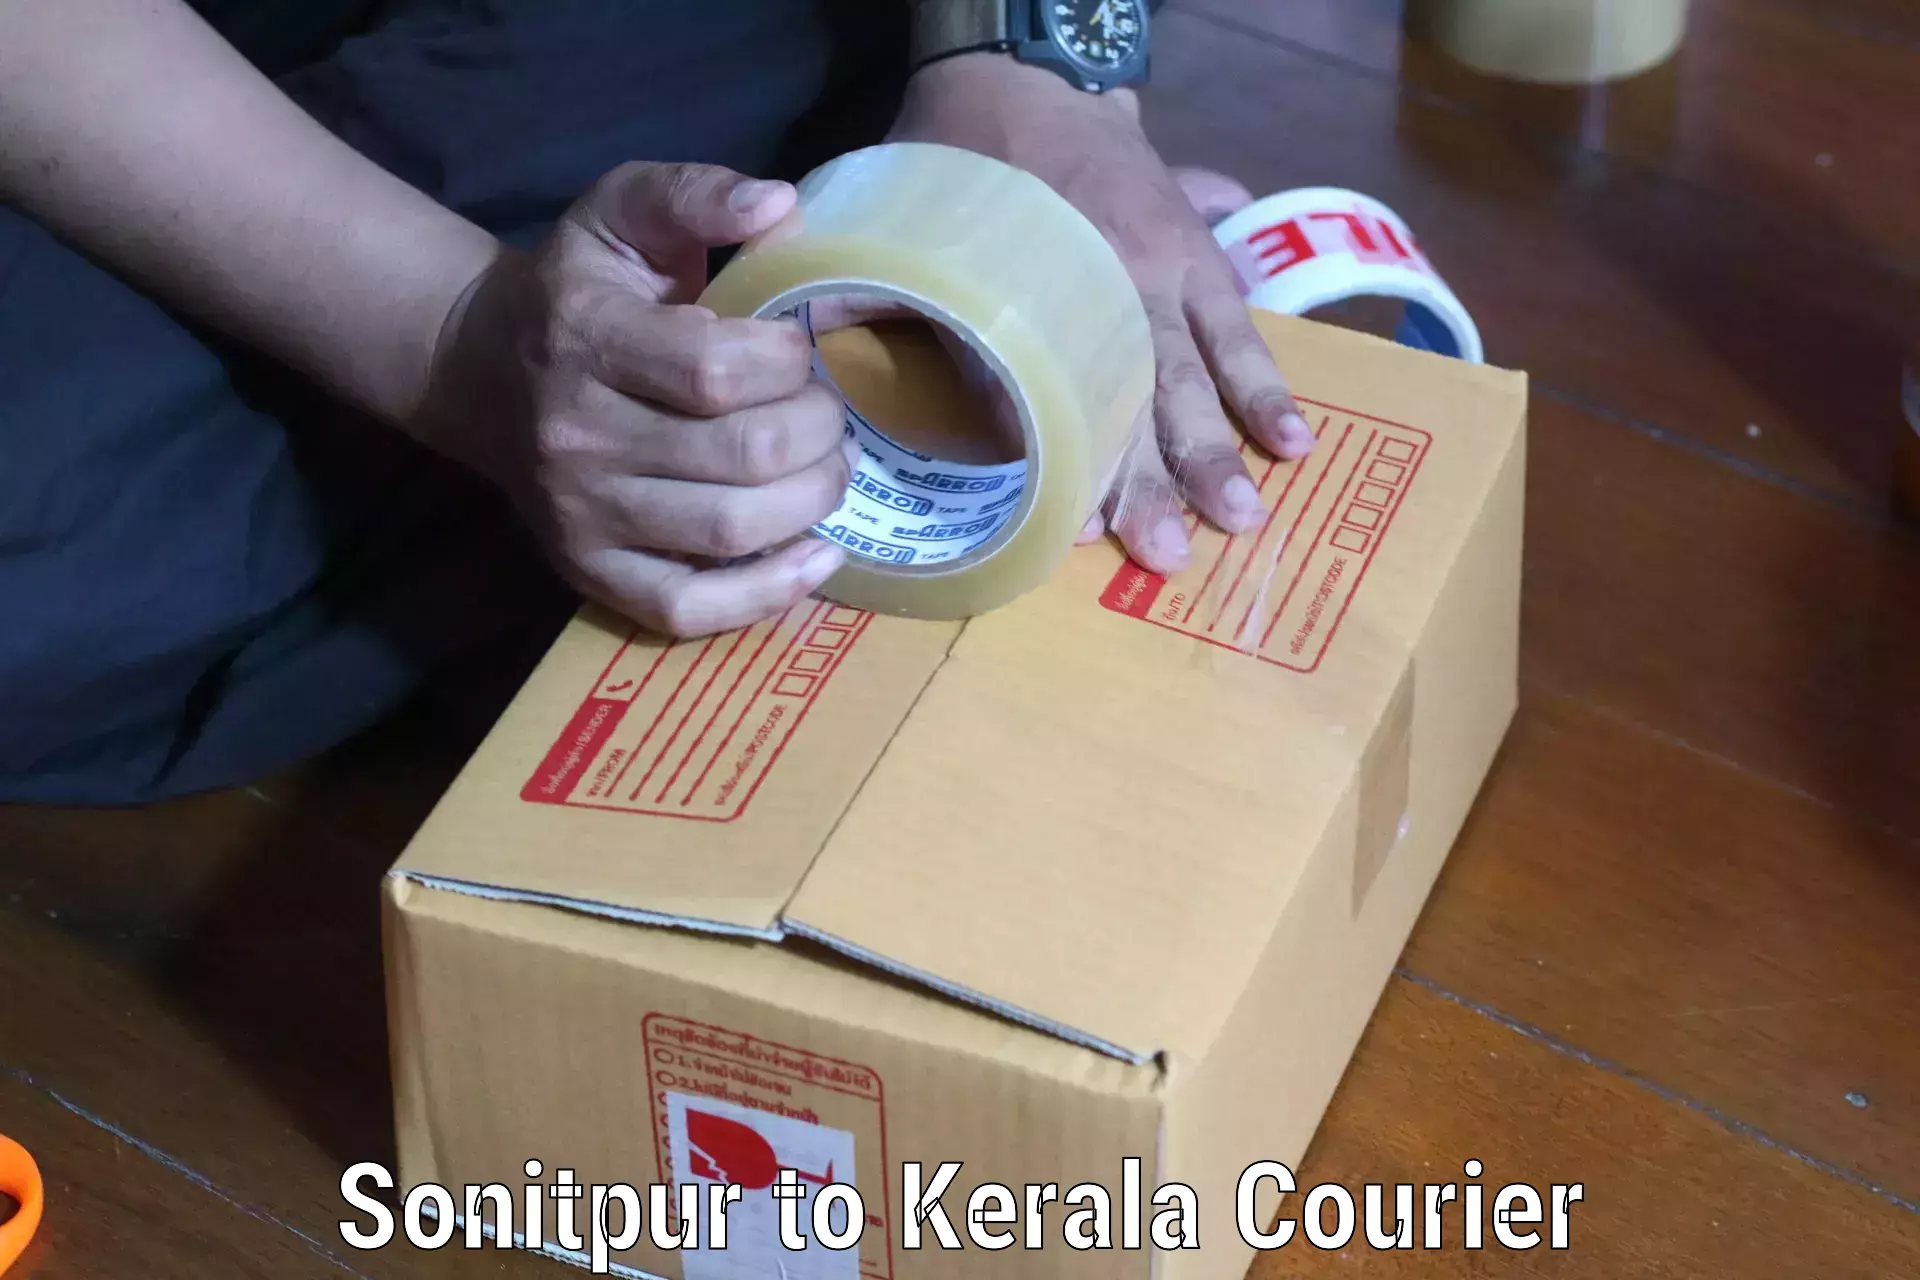 Secure packaging Sonitpur to Trivandrum